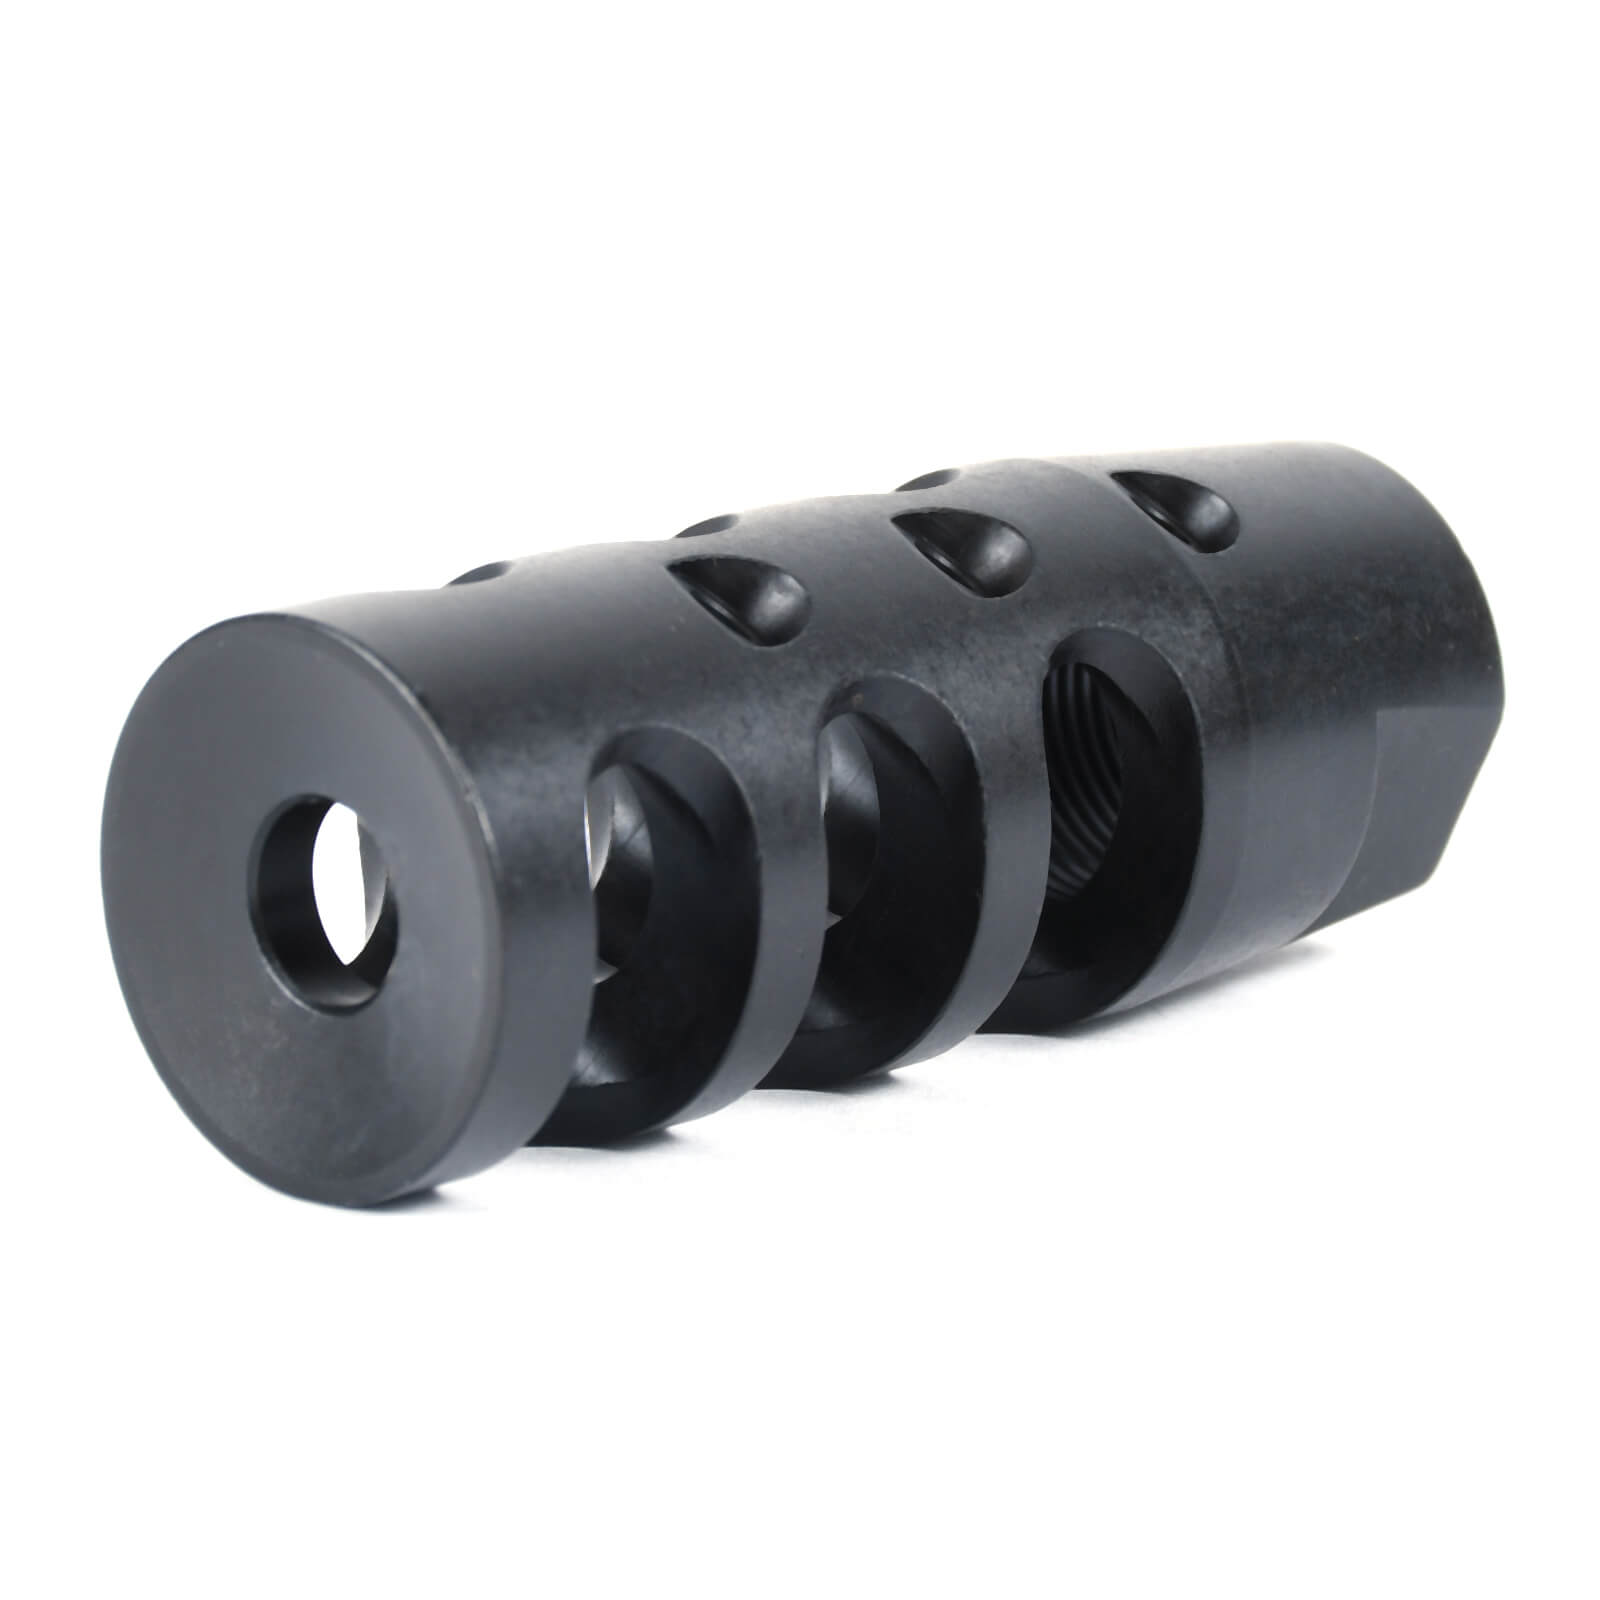 AT3™ AR-15 3-Port Muzzle Brake with Crush Washer - 1/2x28 Thread for  .223/5.56